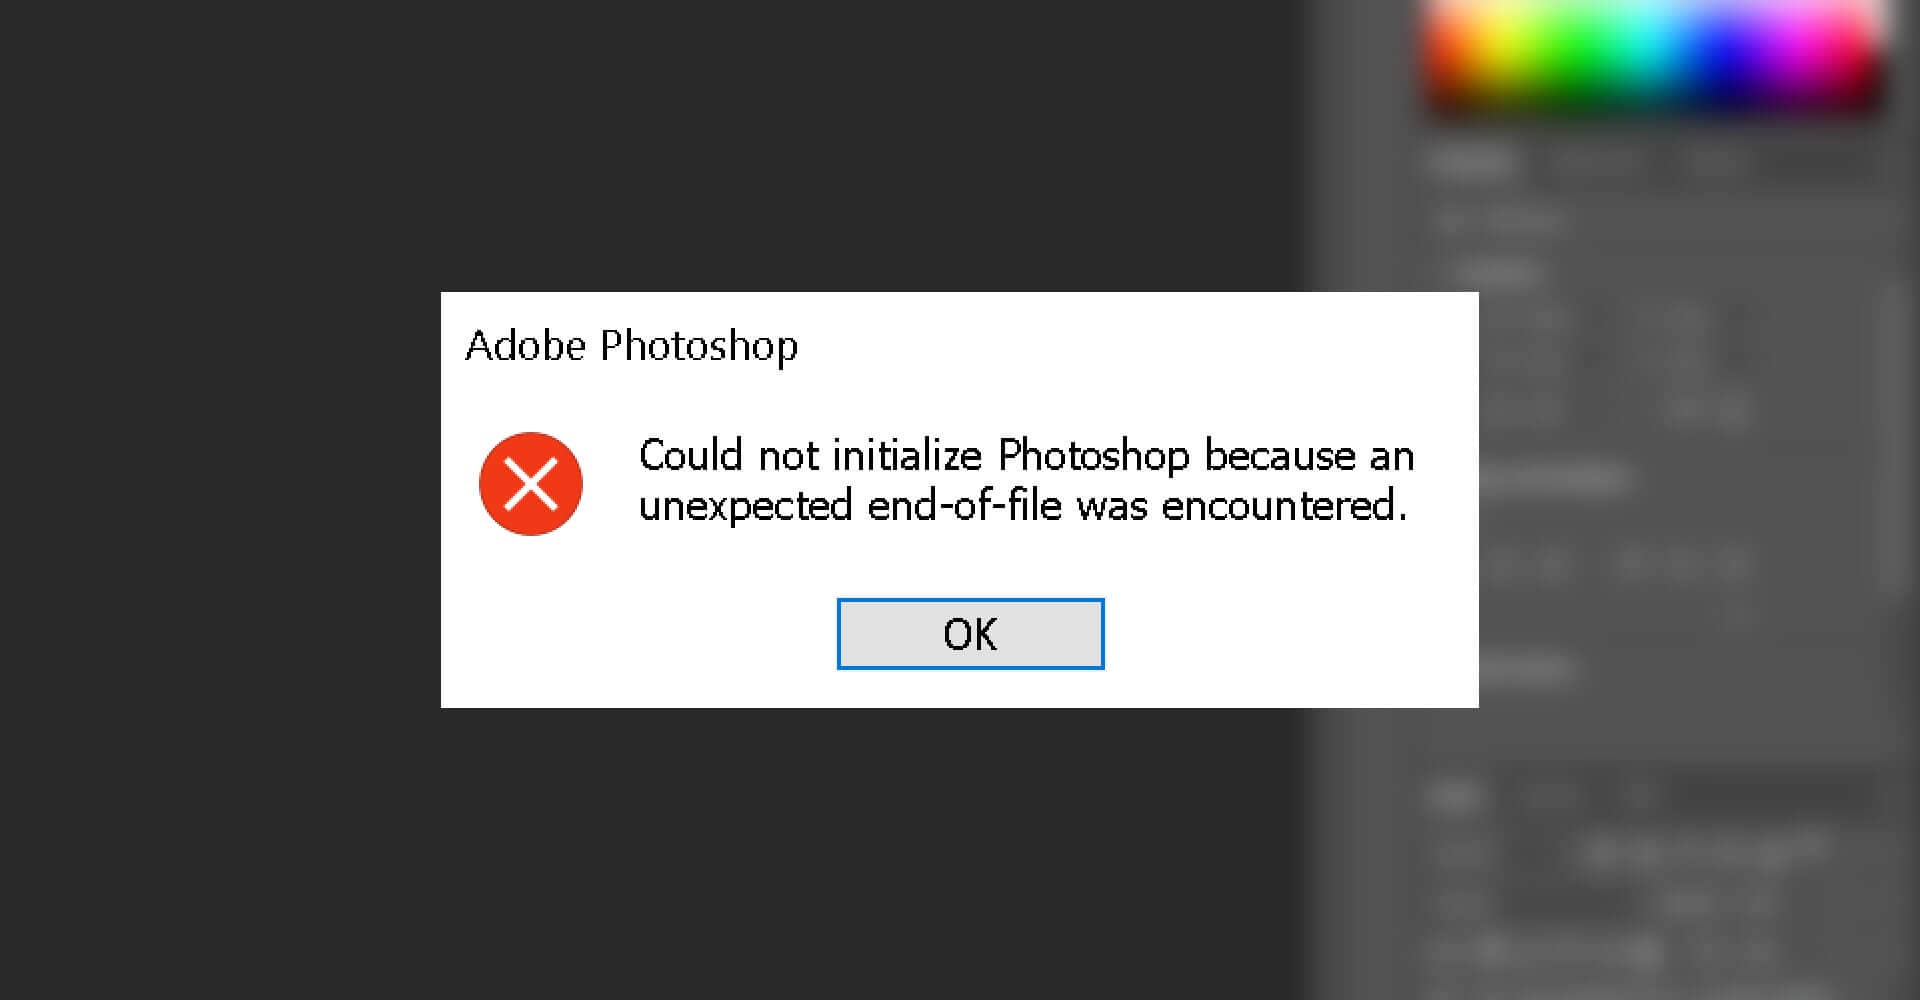 Error message: "Could not initialize Photoshop because an unexpected end-of-file was encountered."